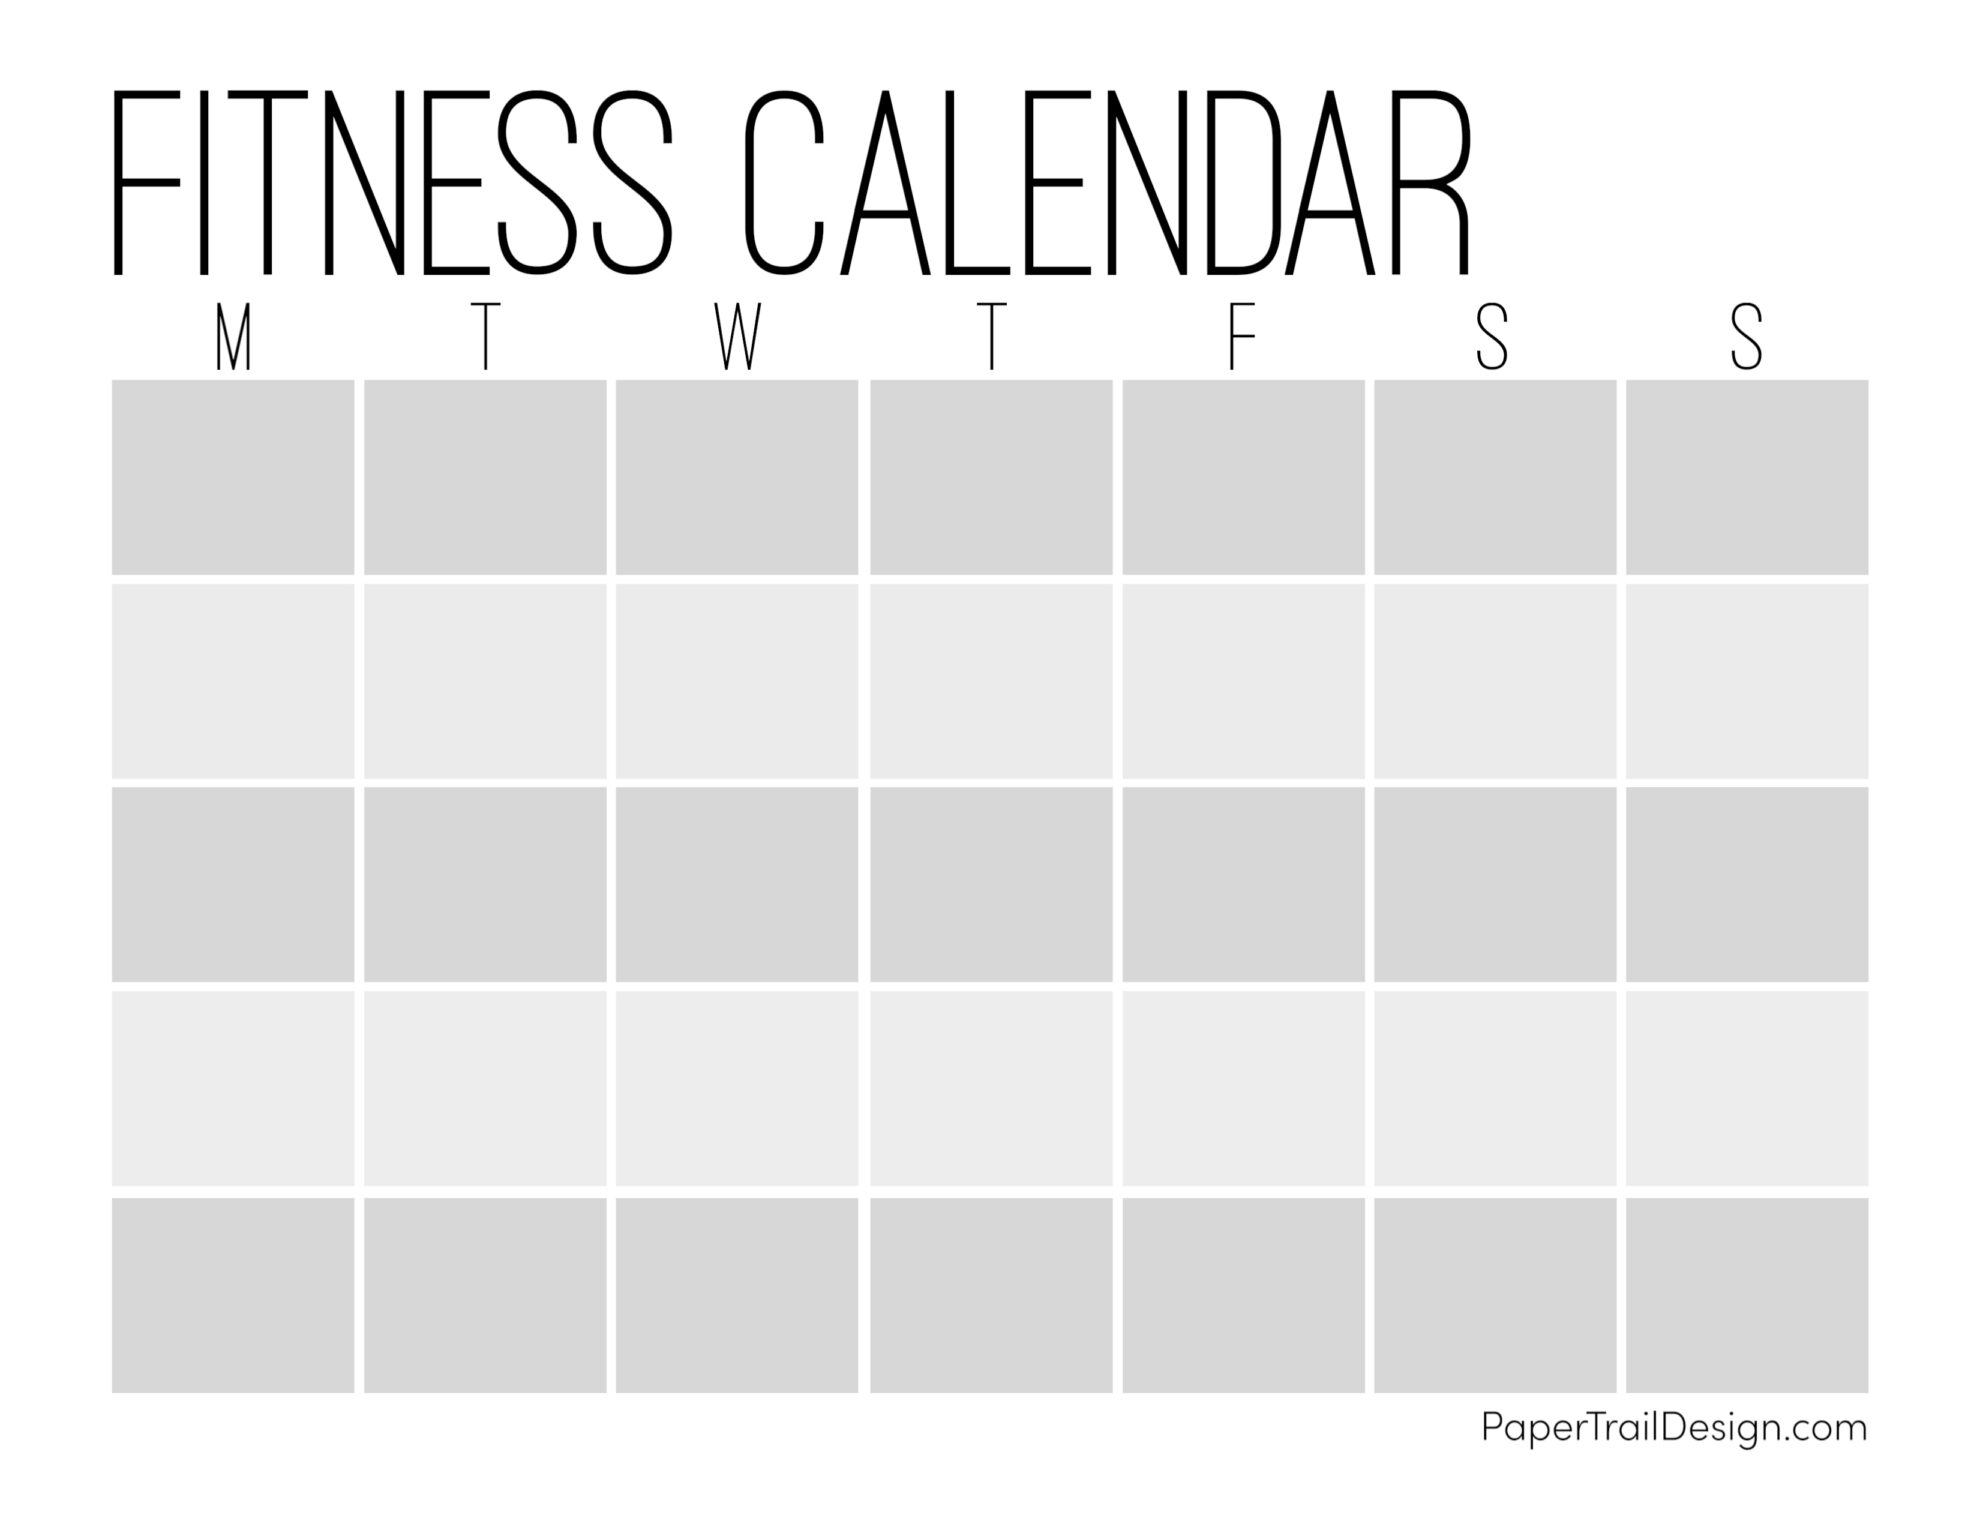 Free Printable Workout Calendar Template  Paper Trail Design For Blank Workout Schedule Template